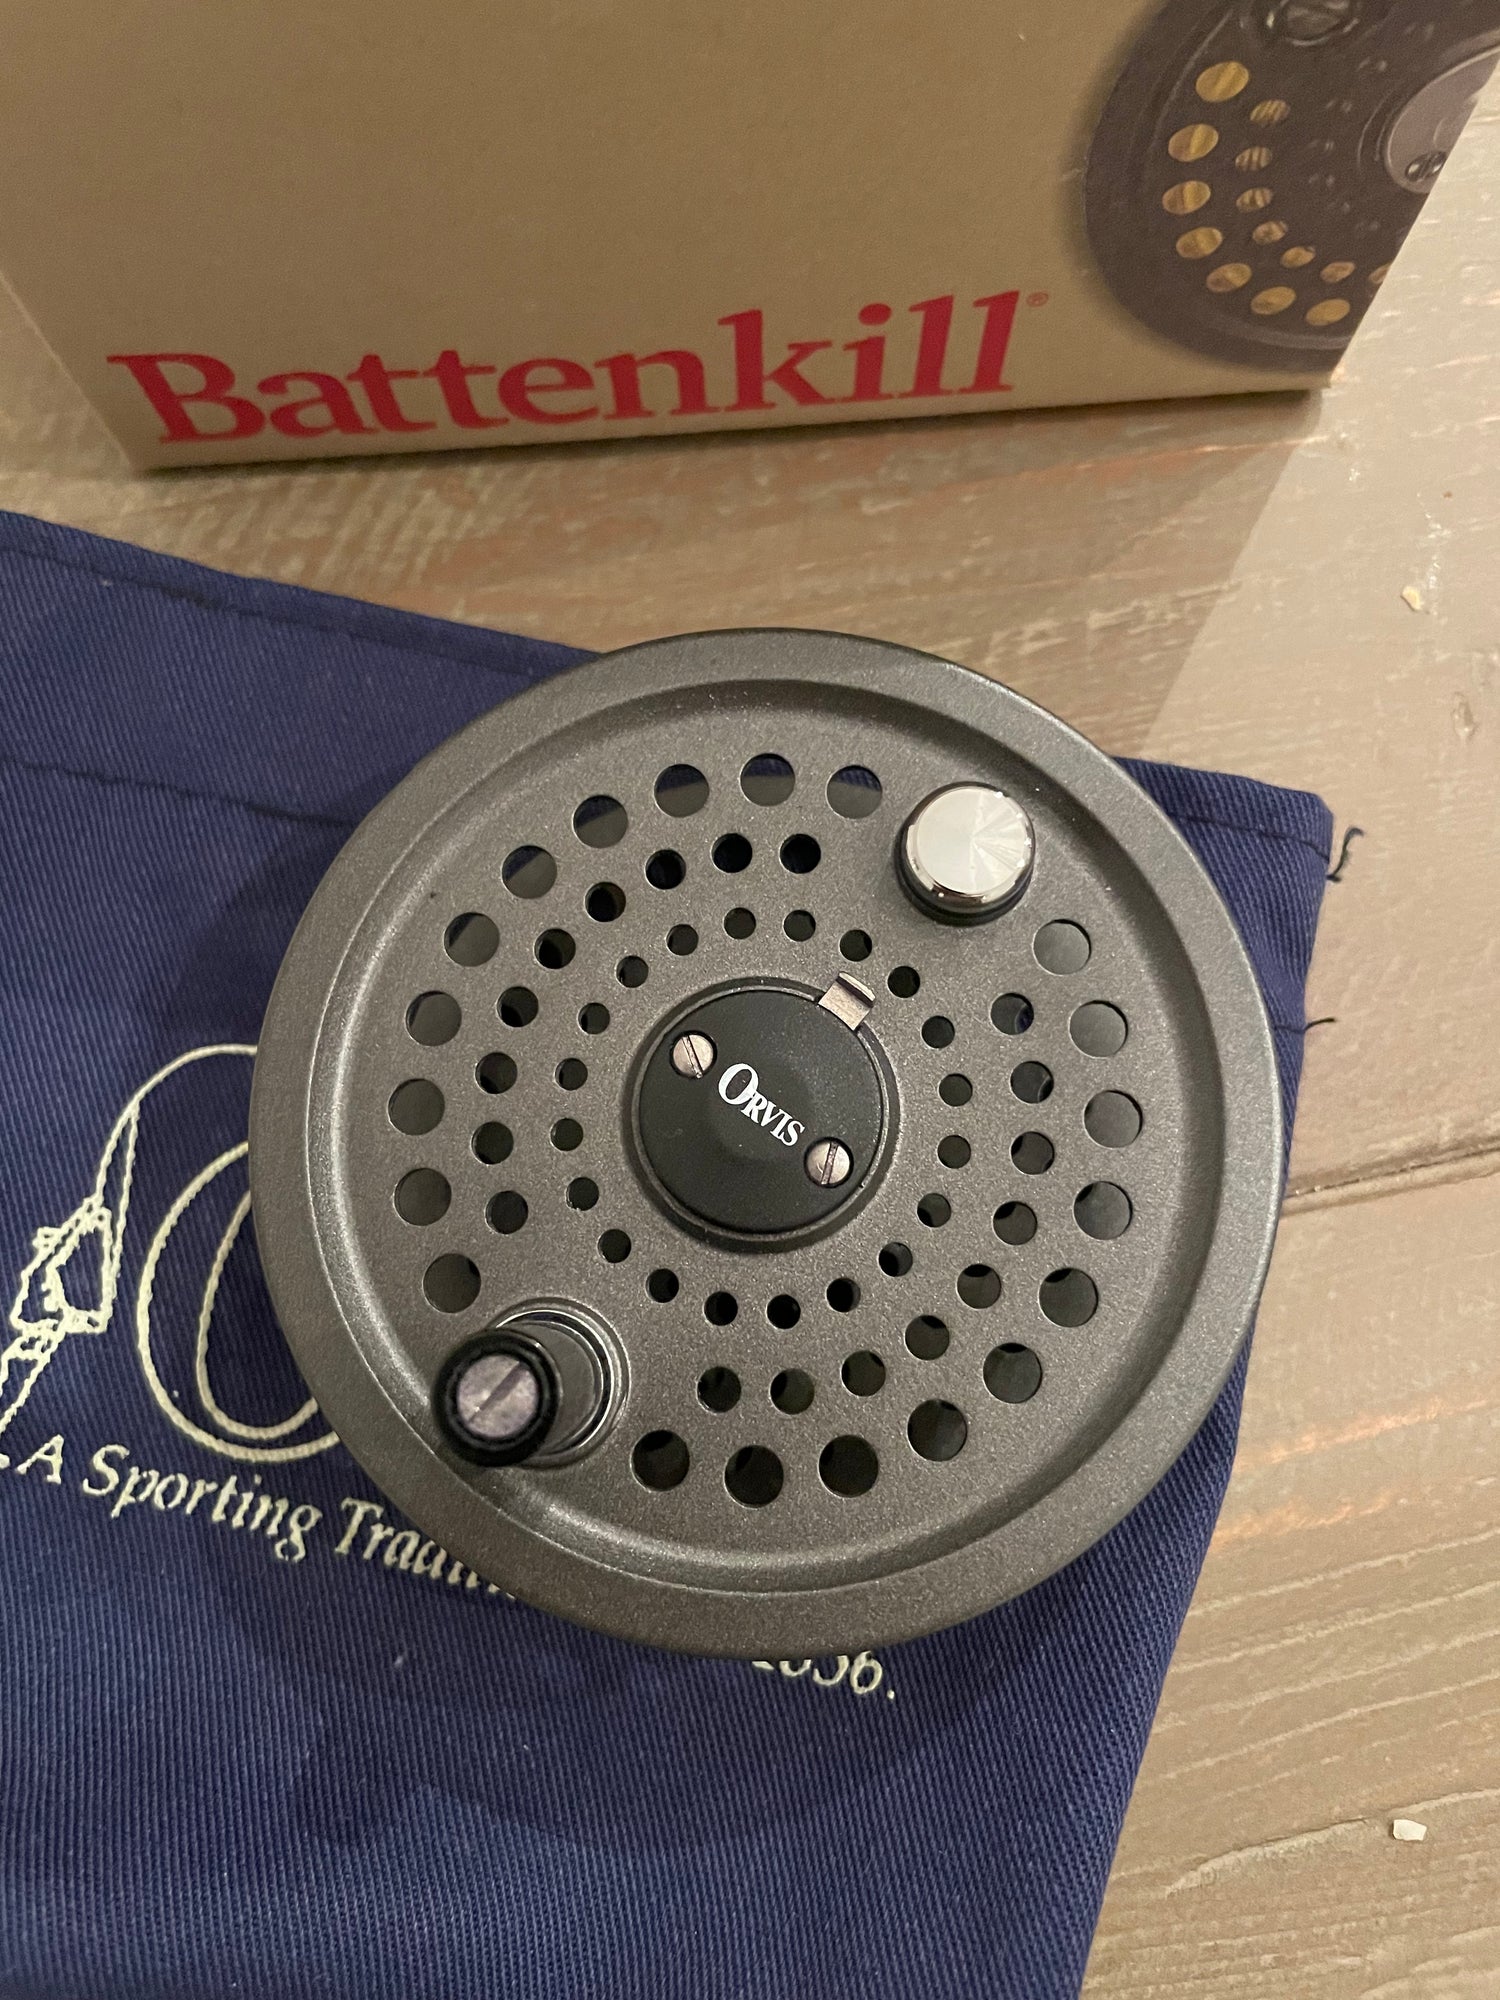 Orvis Battenkill Fly Reel Extra spool with box – Cardinal Camera Used